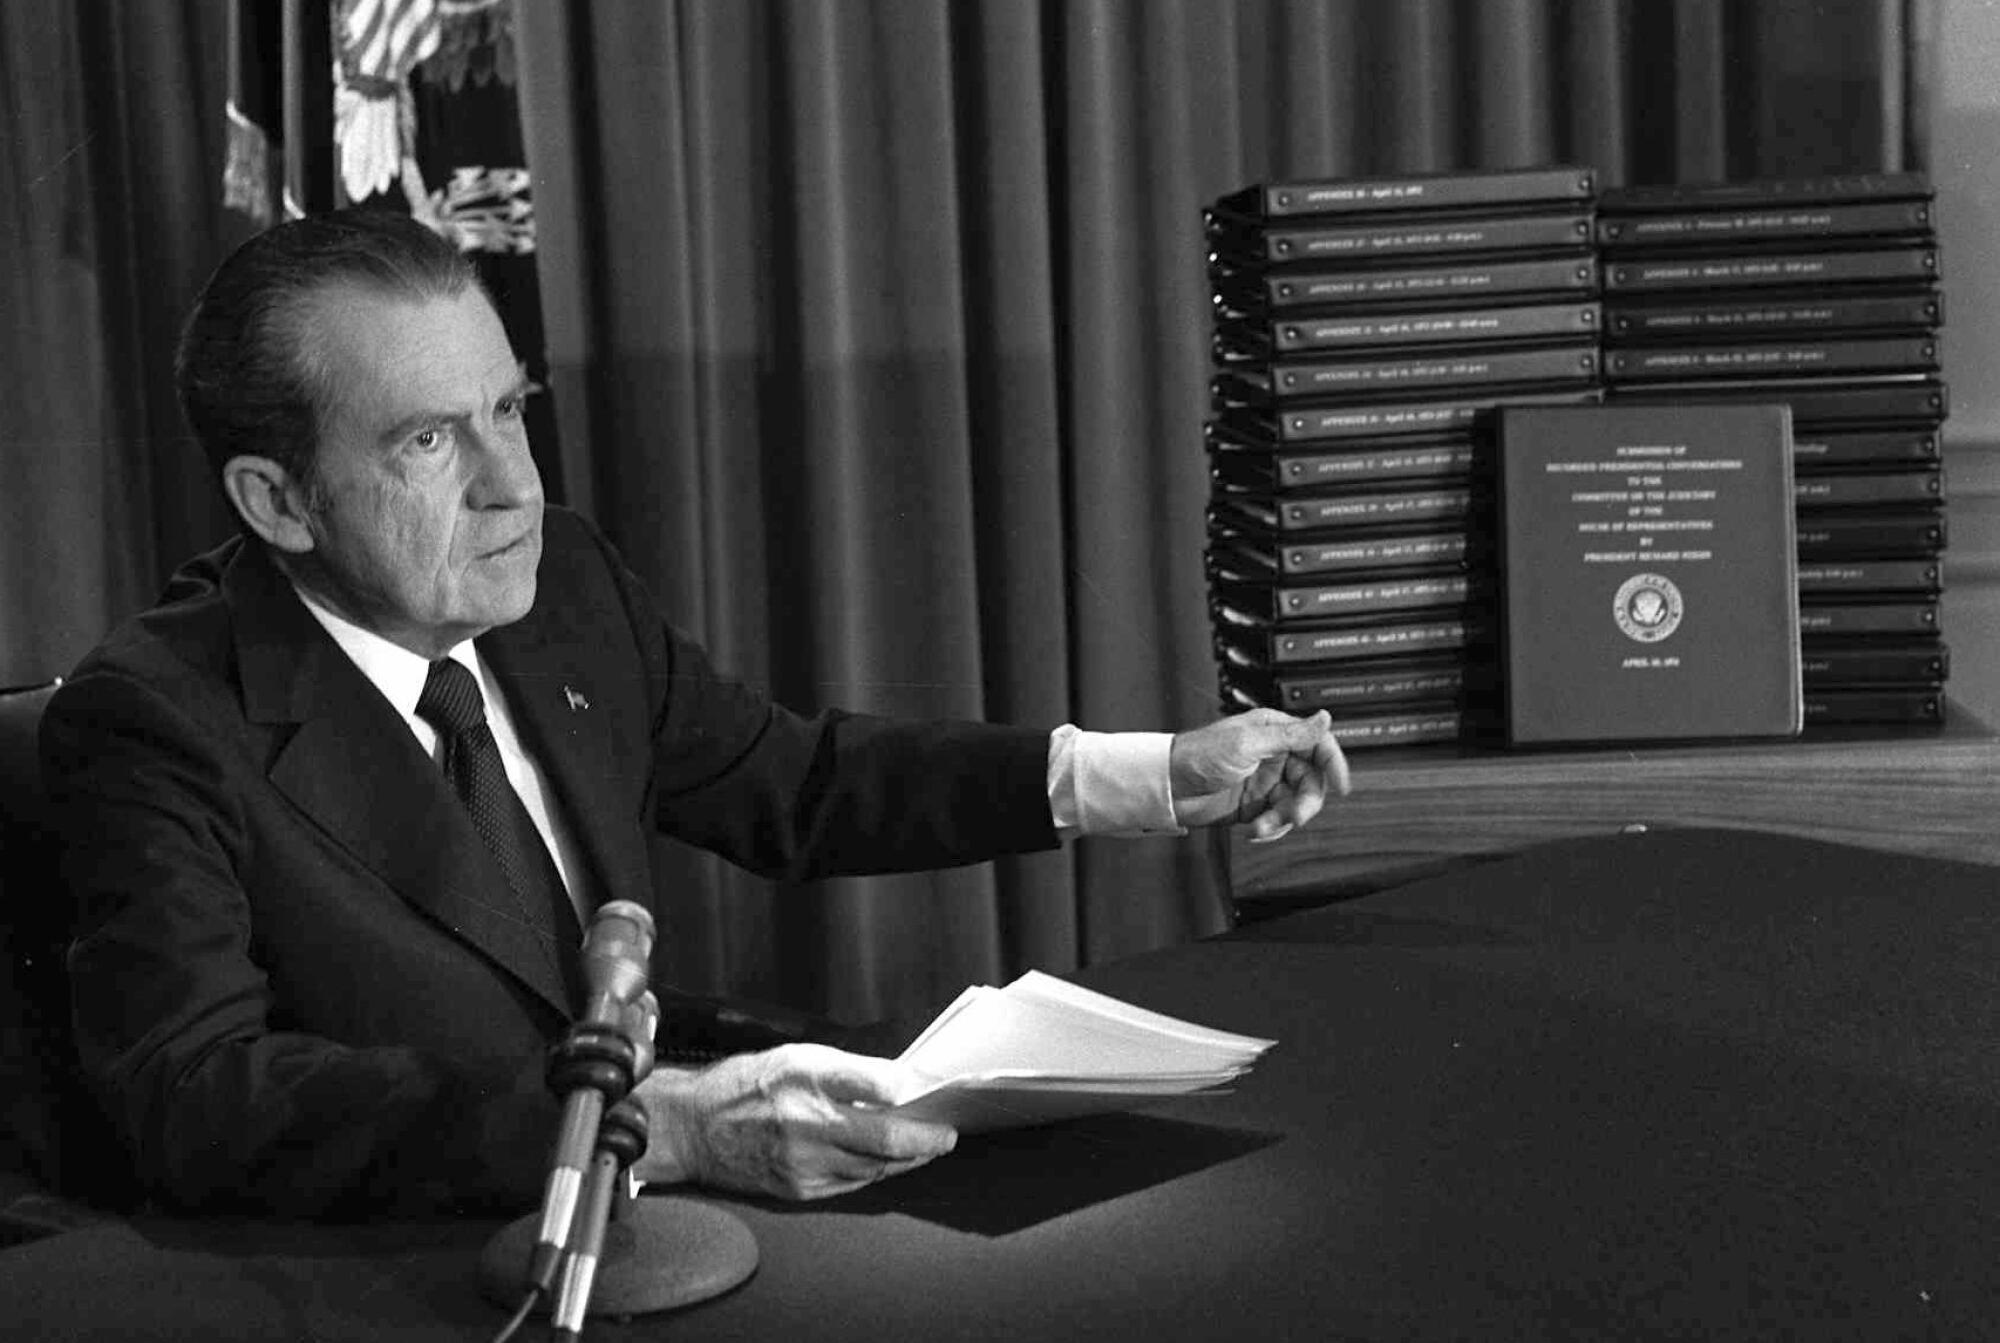 A black-and-white photo of President Nixon gesturing at more than two dozen binders, one propped up and the rest in 2 stacks